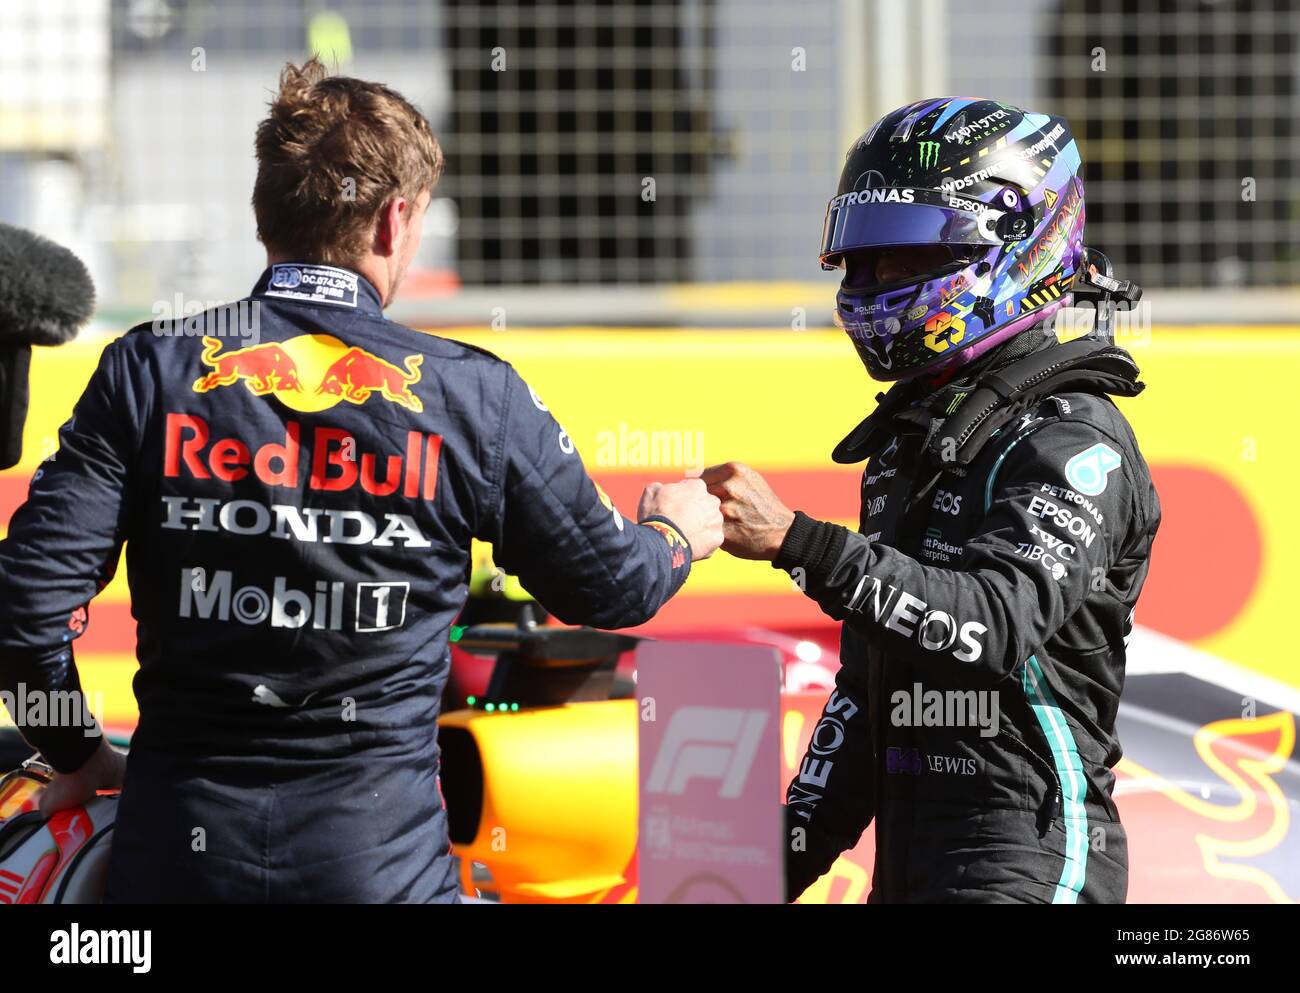 Mercedes' Lewis Hamilton (right) and Red Bull Racing's Max Verstappen bump  fists after the sprint race of the British Grand Prix at Silverstone,  Towcester. Picture Date: Saturday July 17, 2021 Stock Photo - Alamy